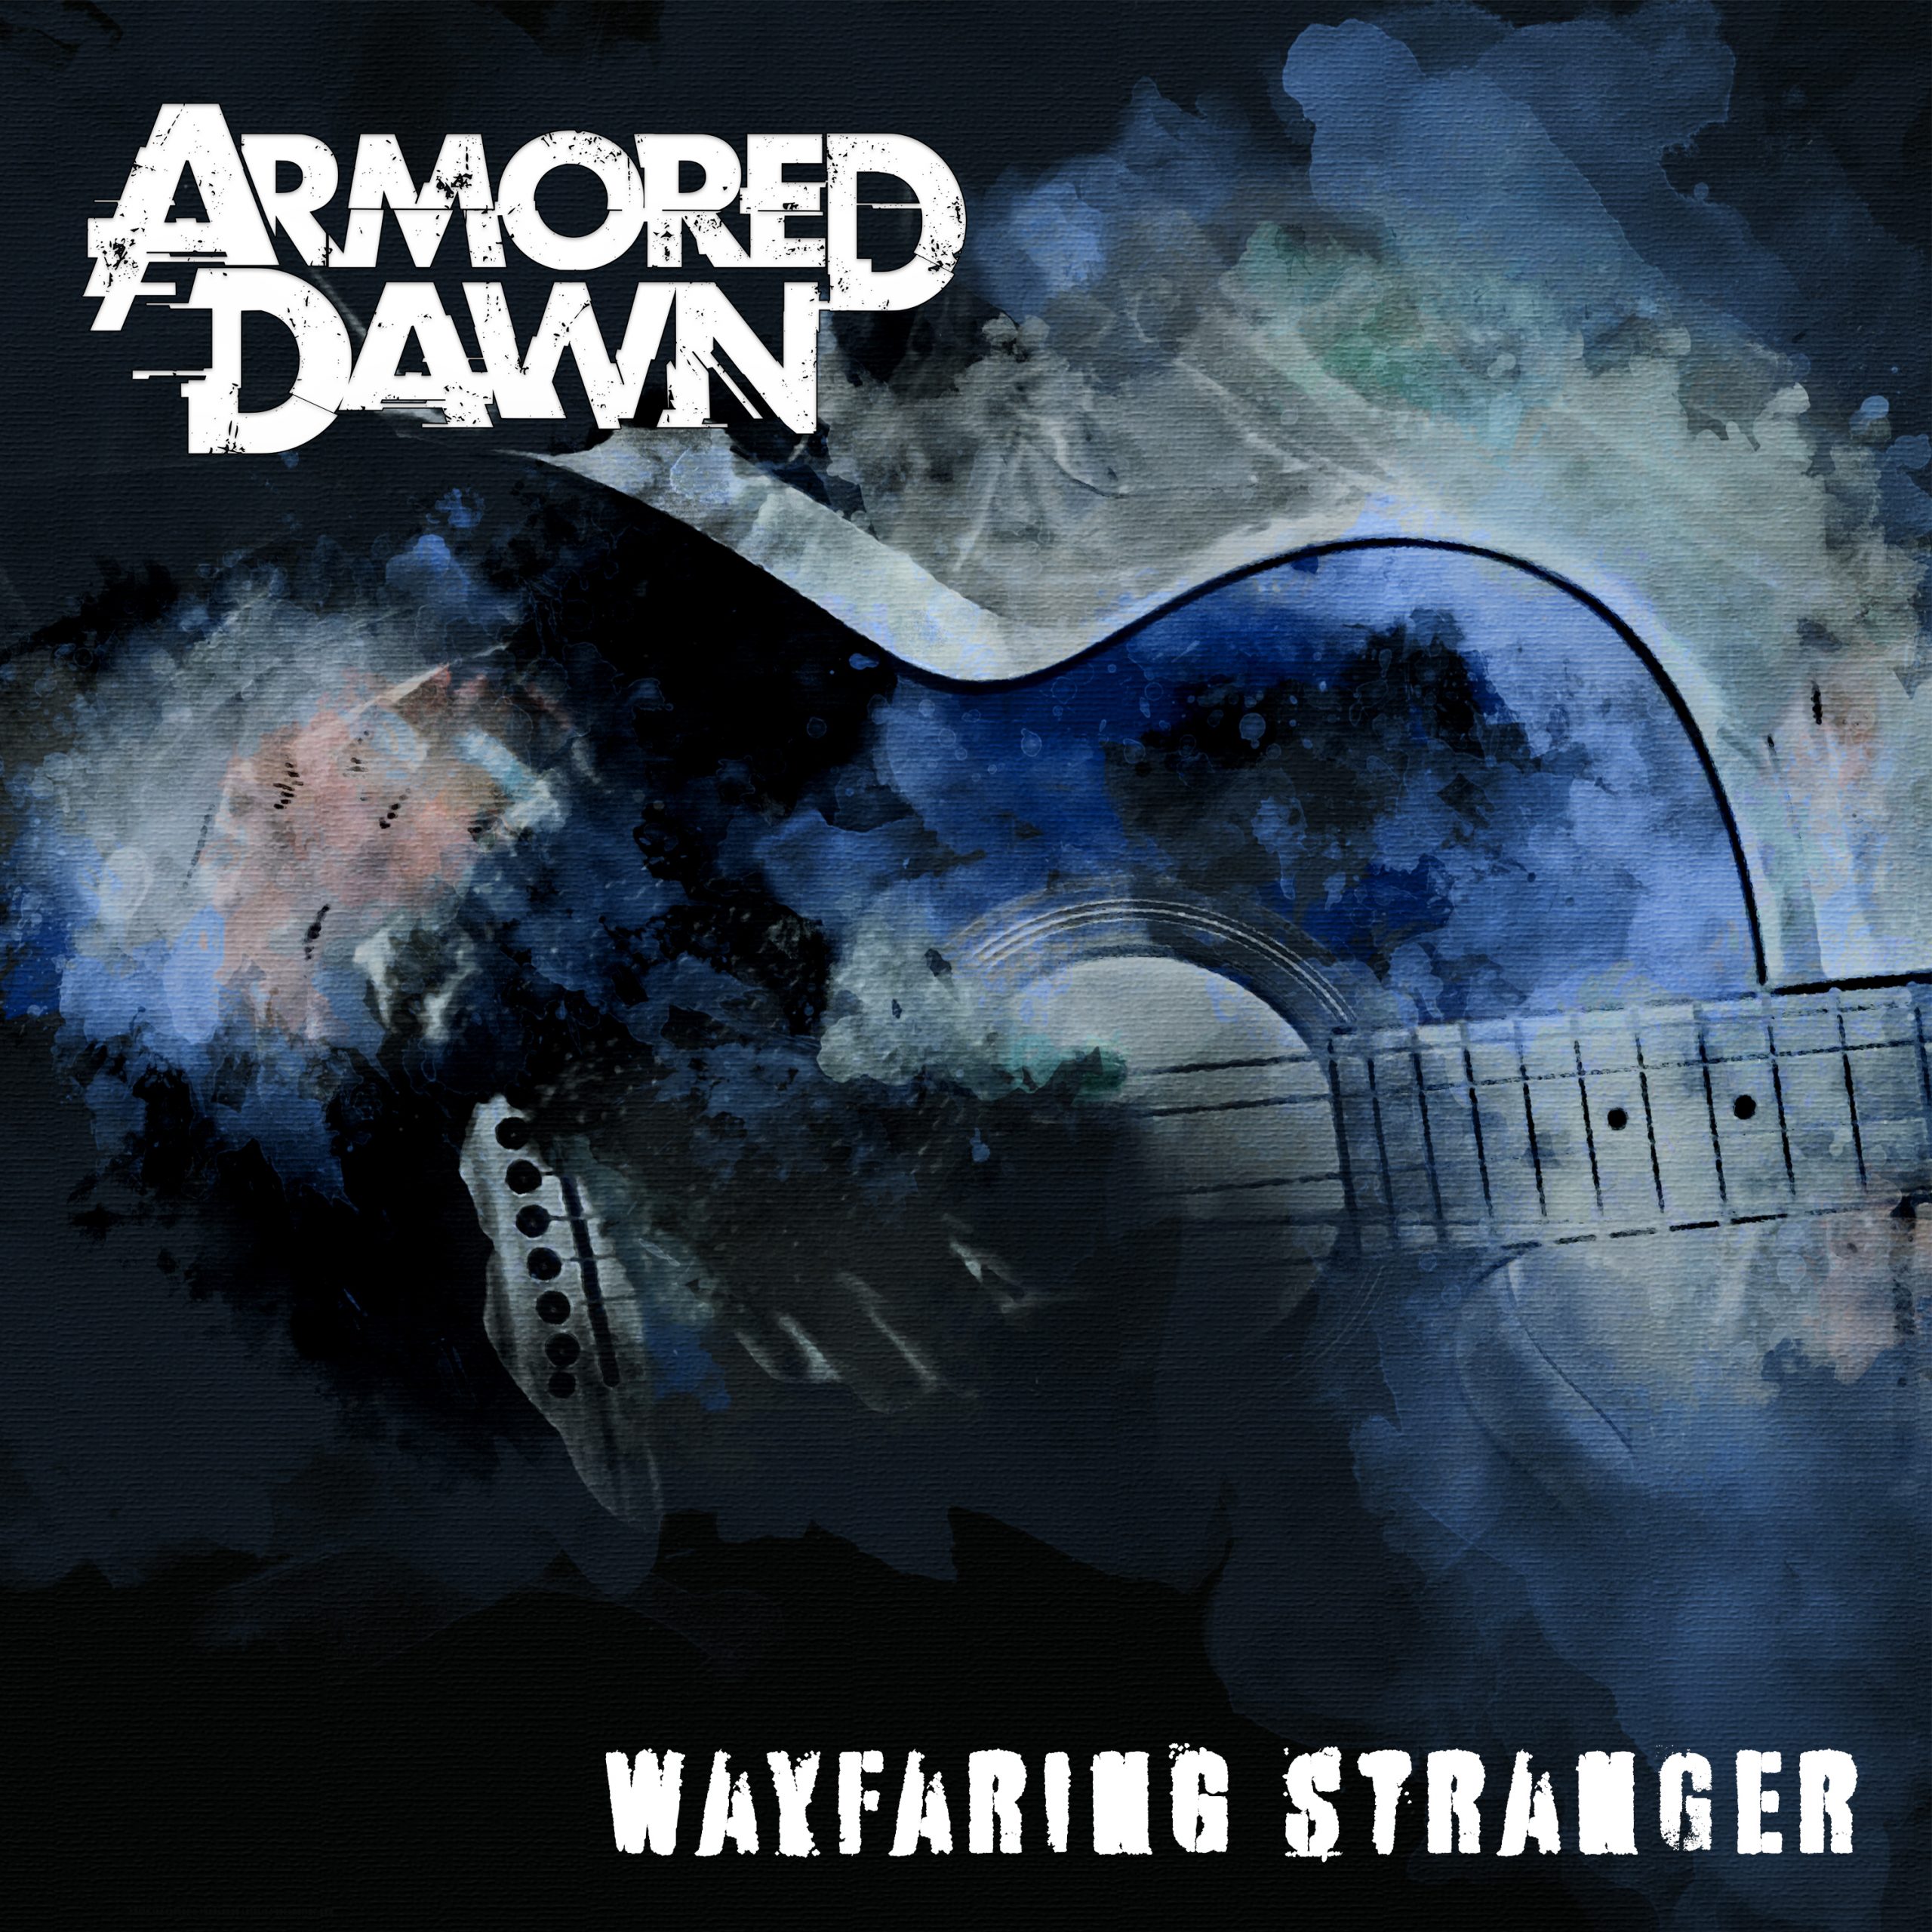 Metal band ARMORED DAWN release the powerful “Wayfaring Stranger” a heavy version of the Johnny Cash song.